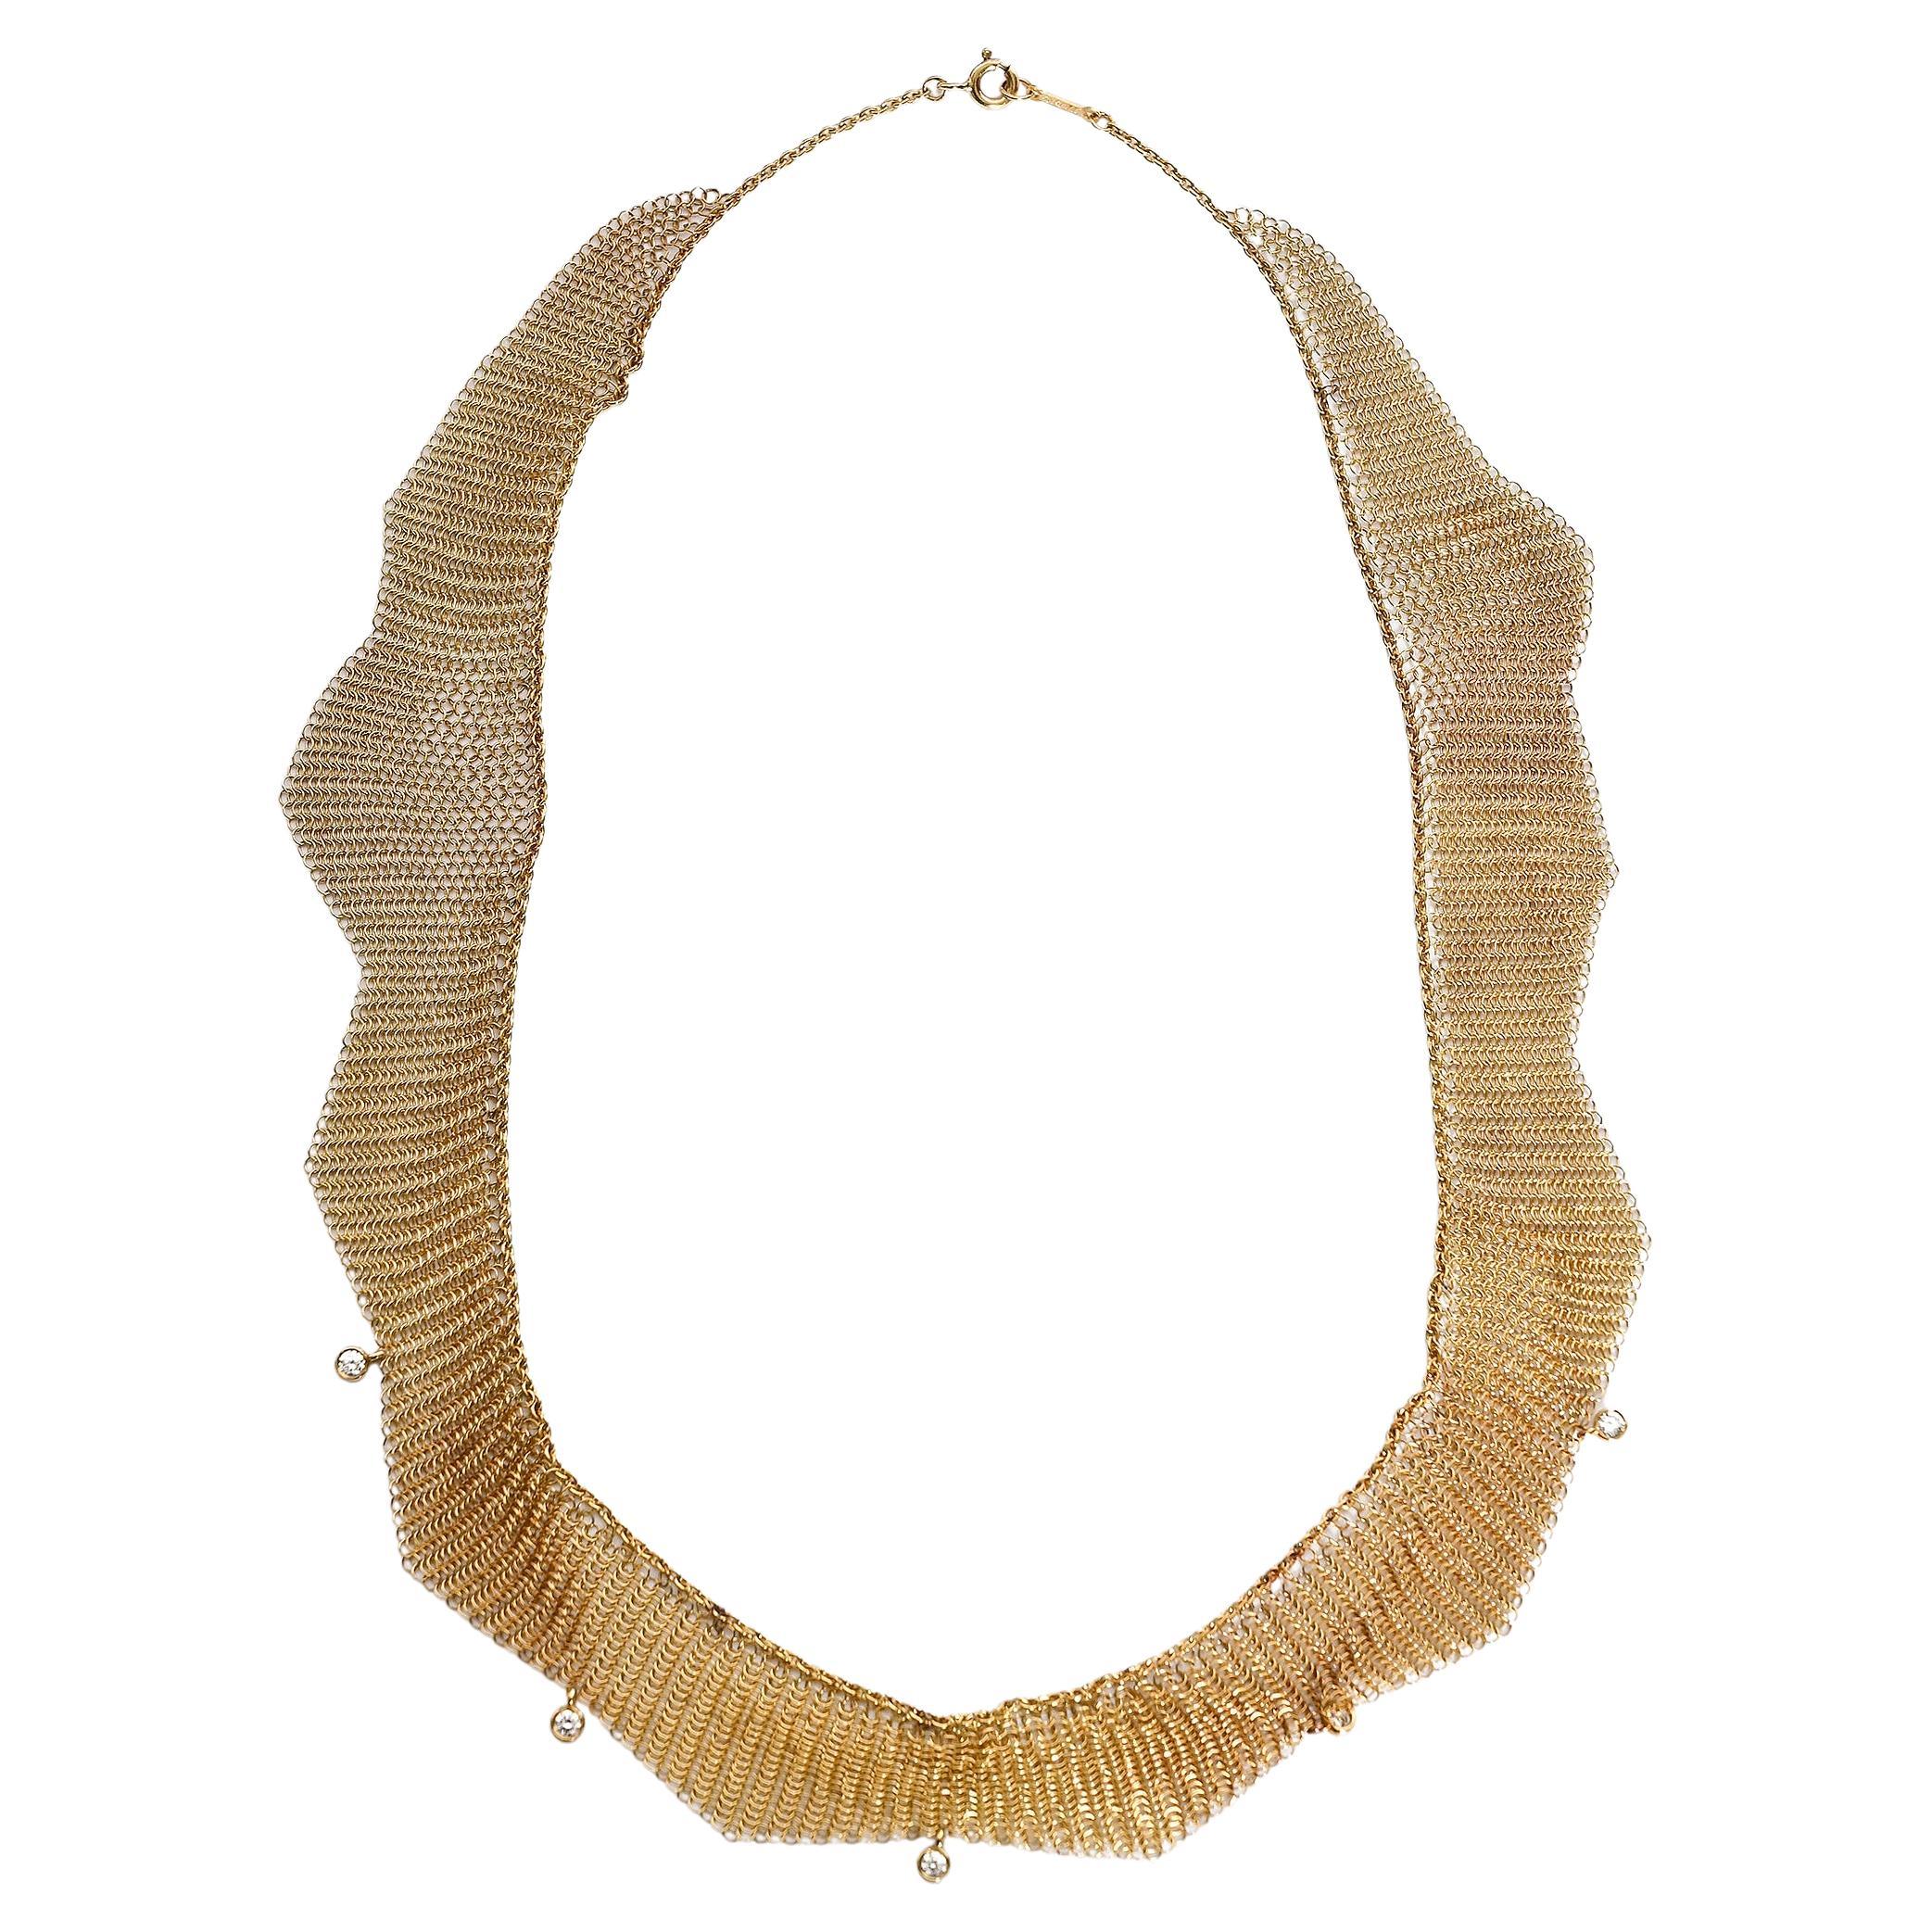 Tiffany & Co. Gold Mesh Necklace with Diamonds